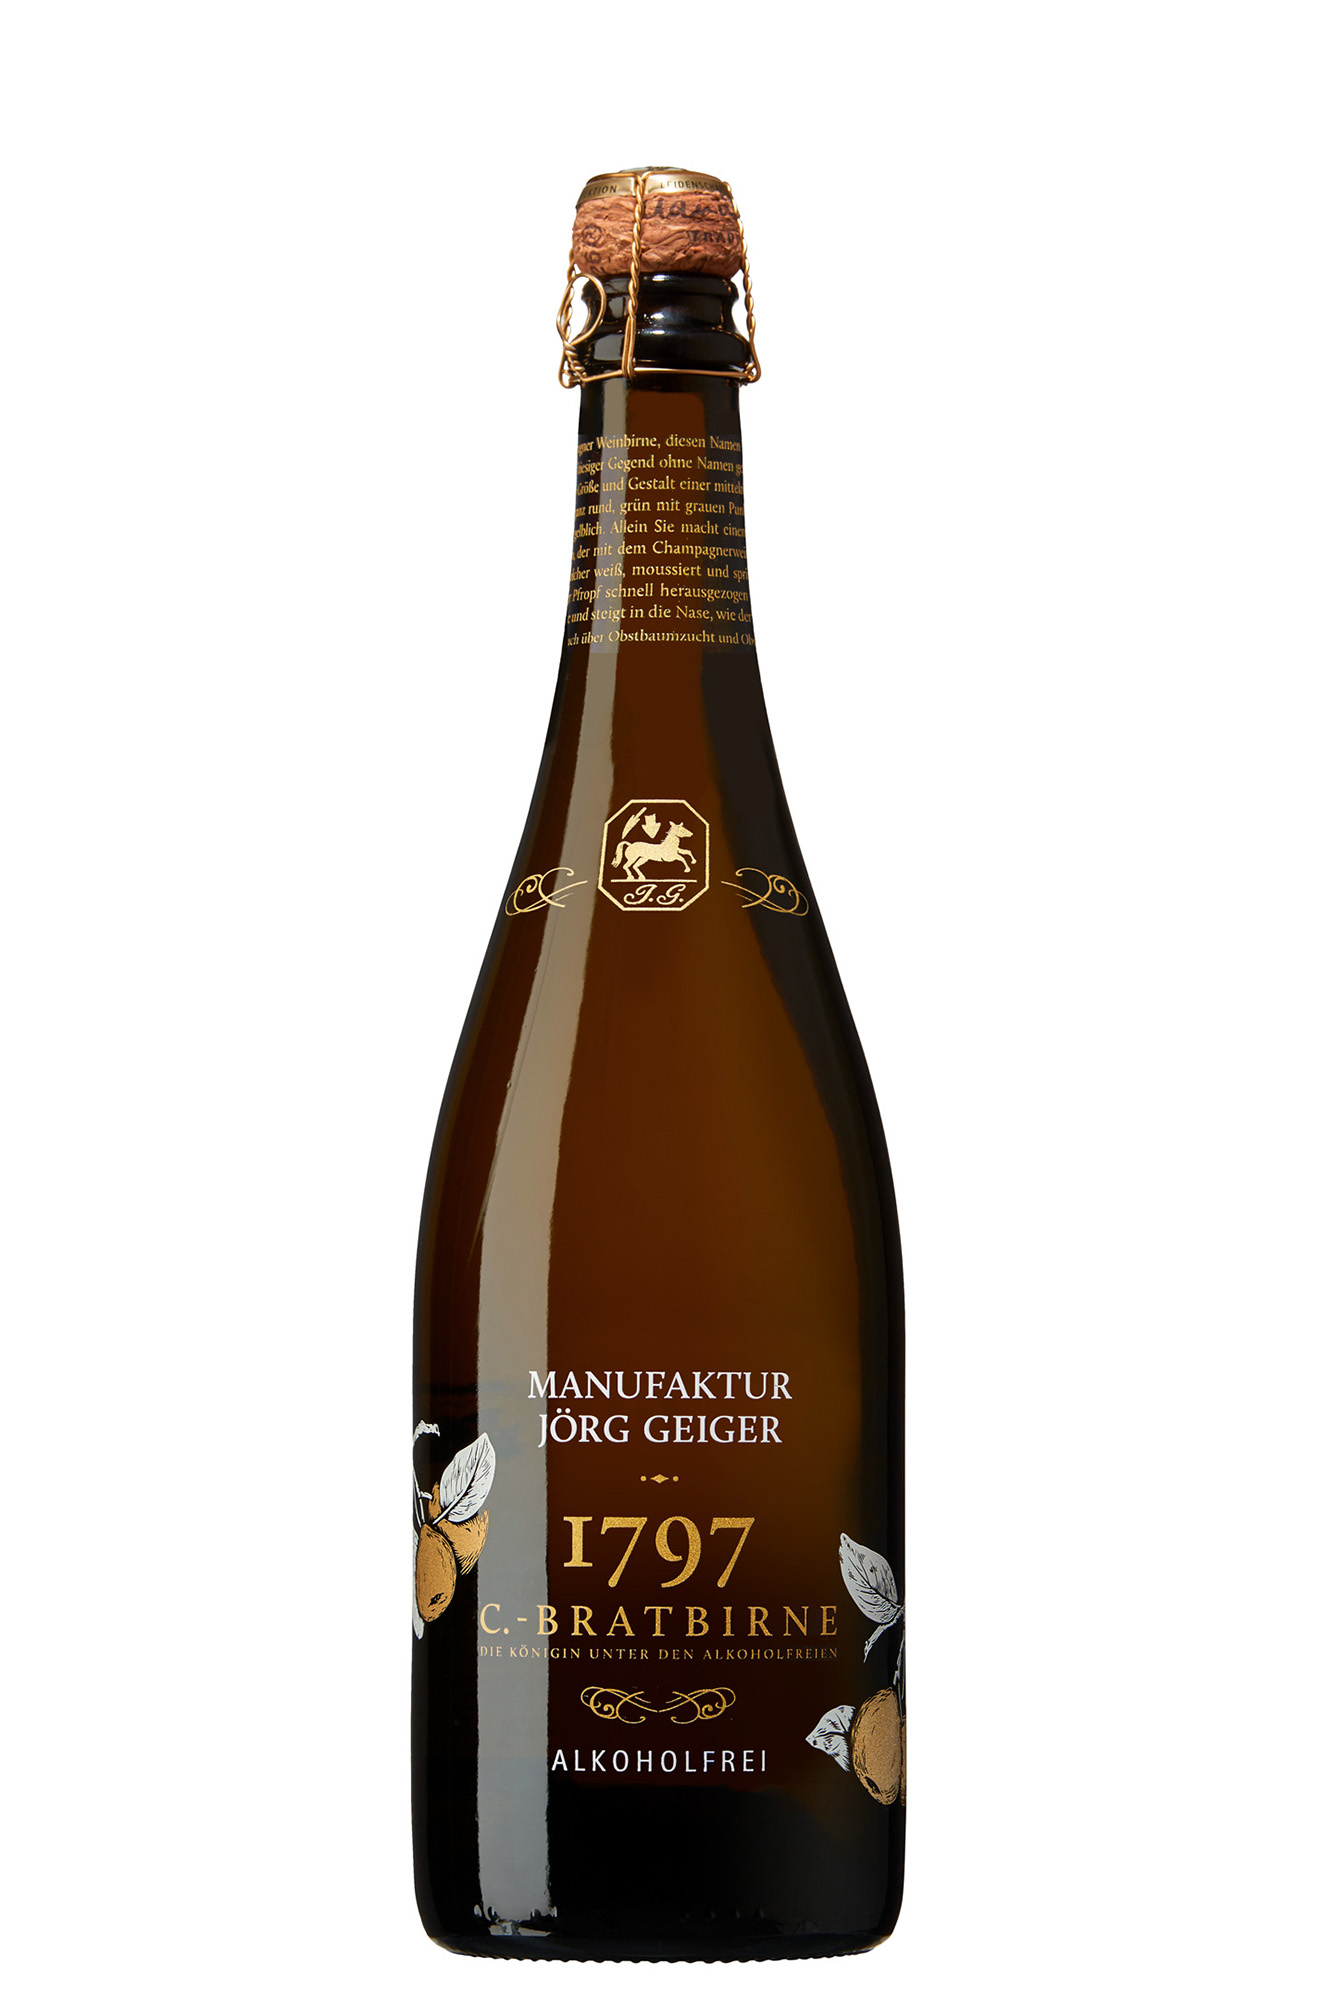 C.- Bratbirne Heritage [most]- Pear – the queen among alcohol free drinks